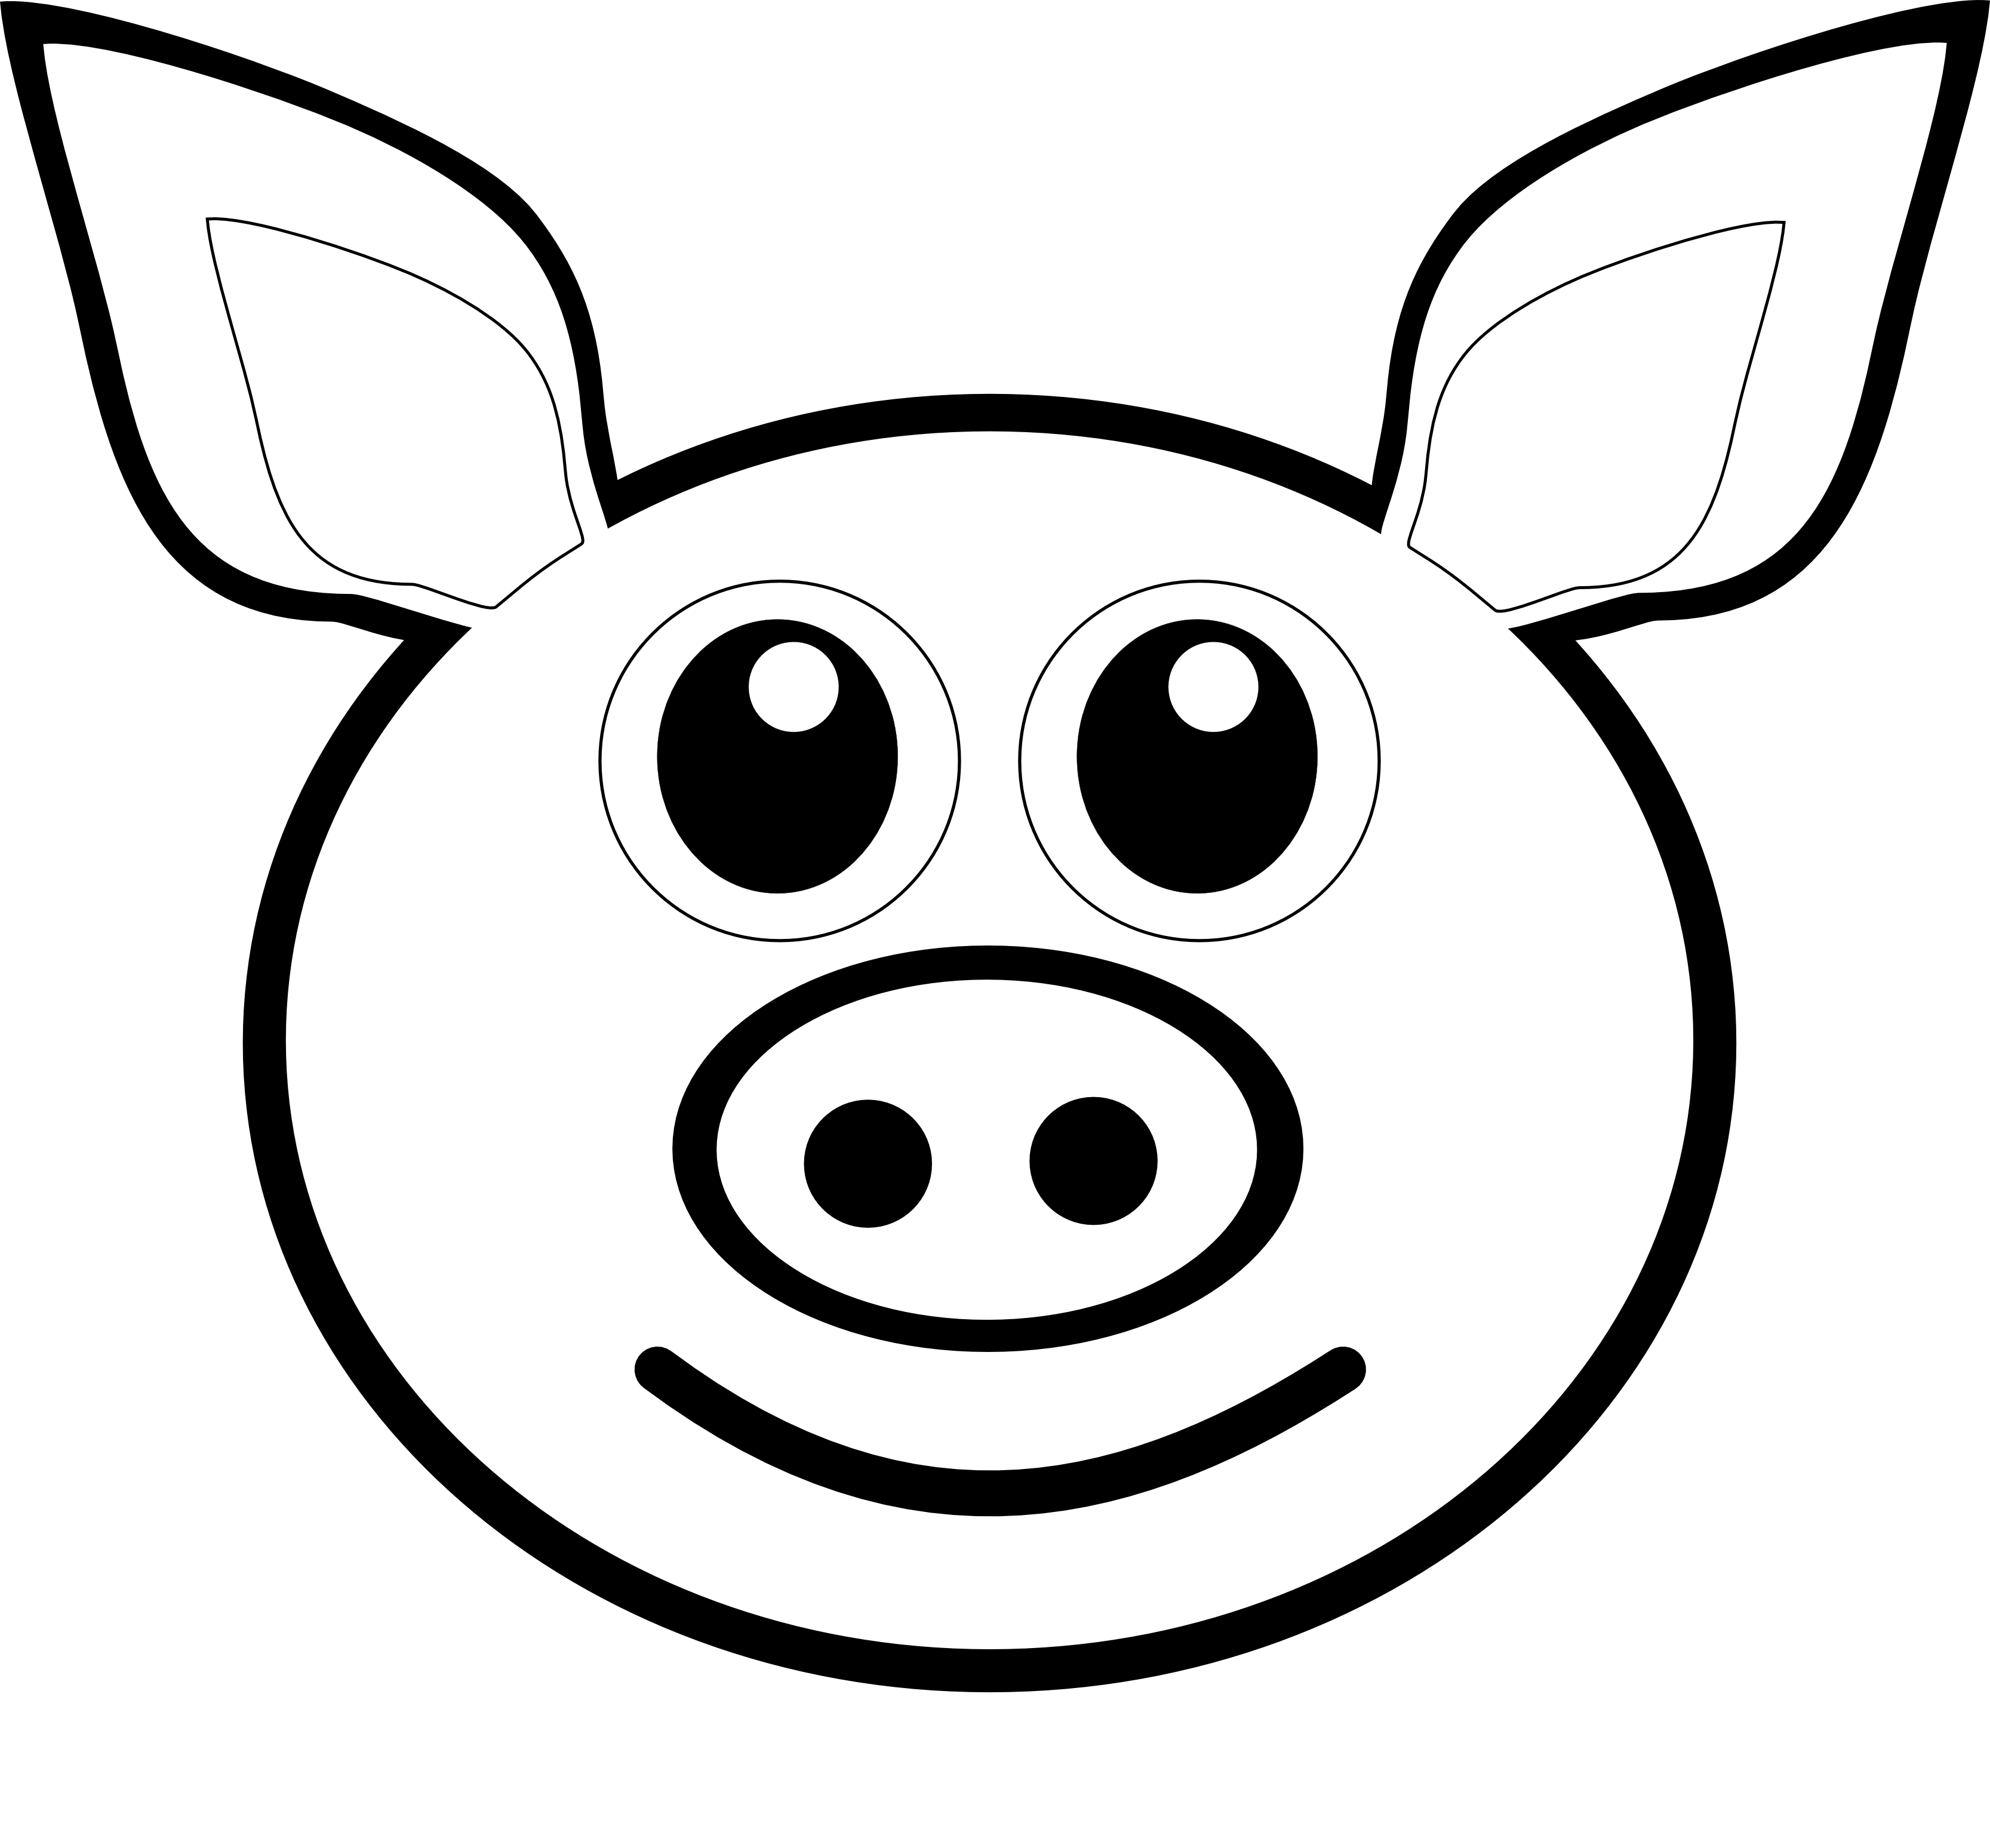 Pig Line Drawing - ClipArt Best - Cliparts.co